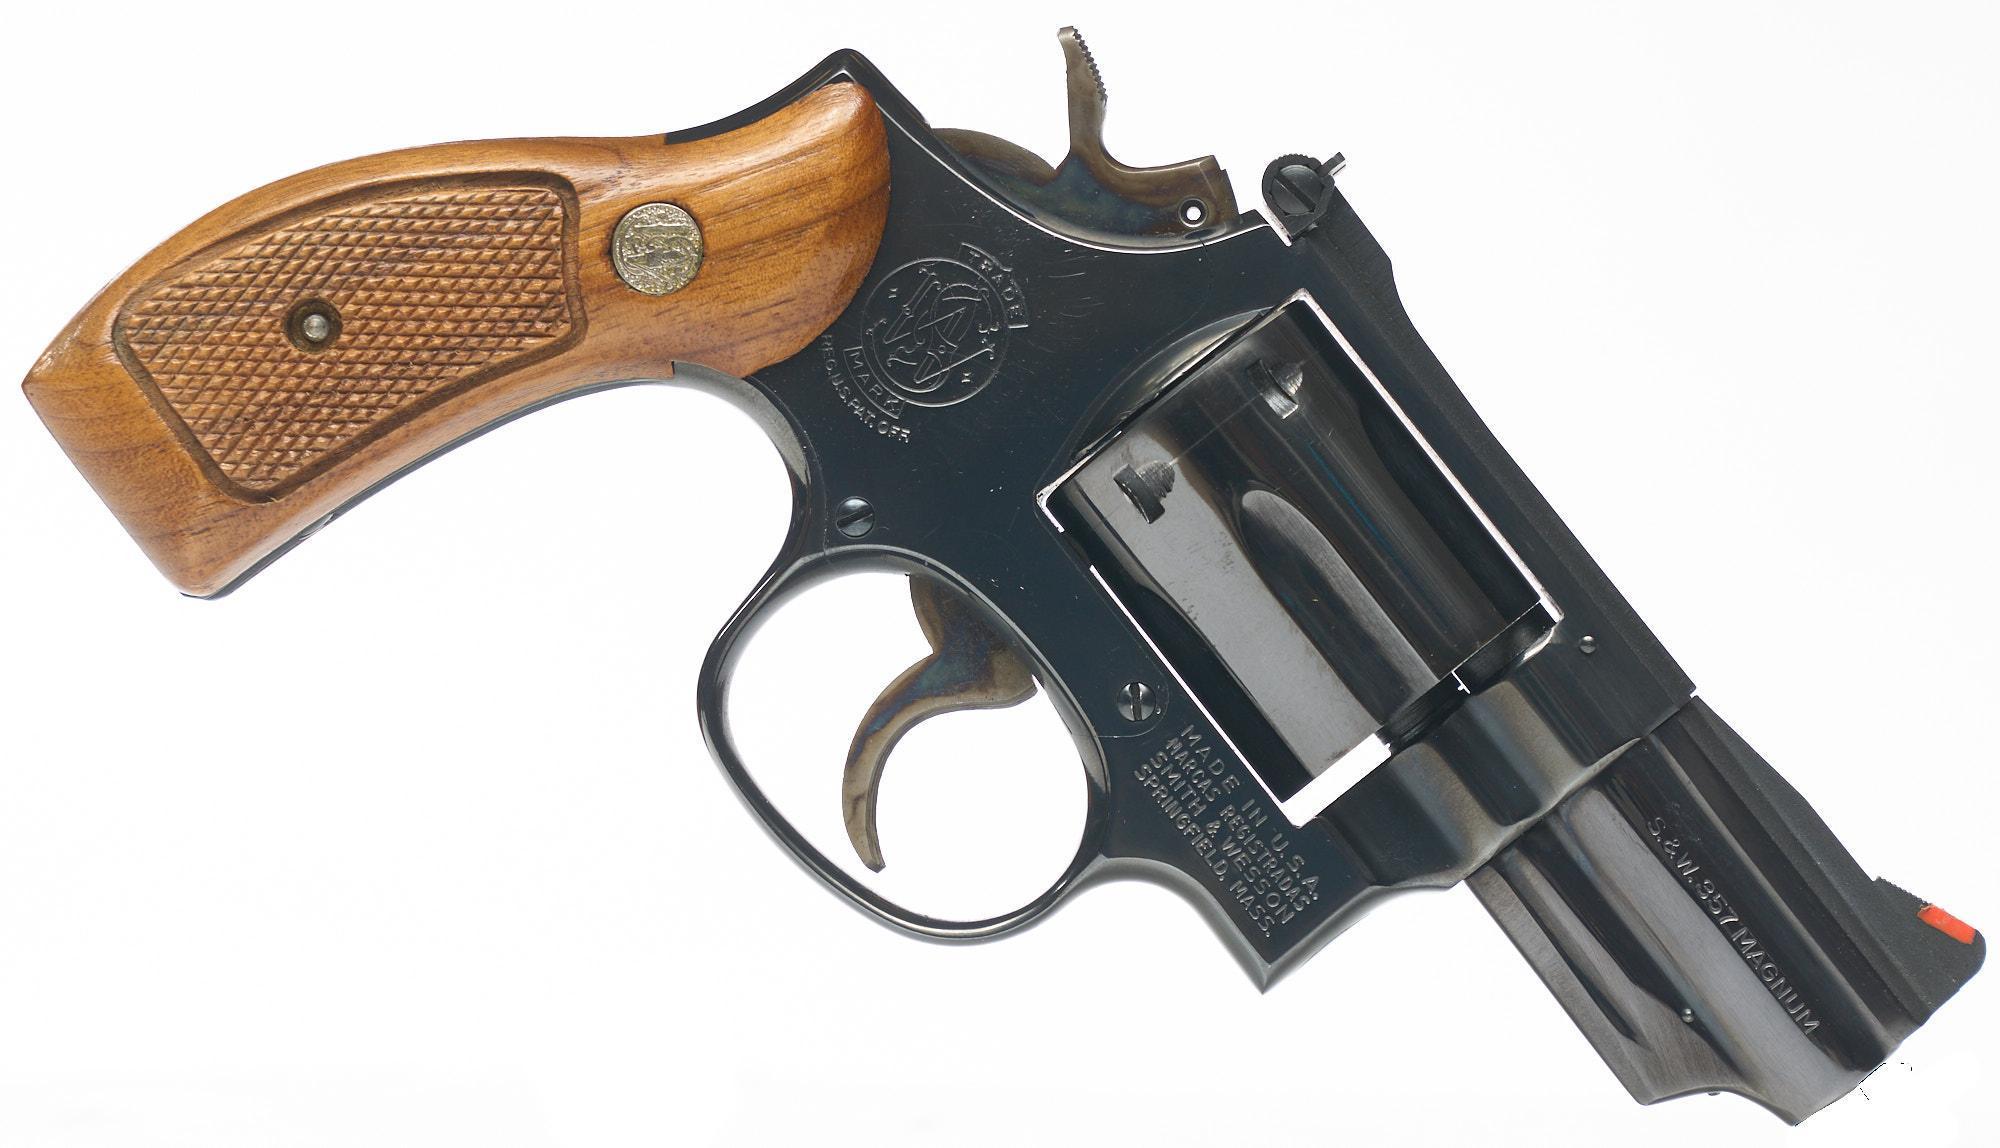 357 magnum smith and wesson model 19